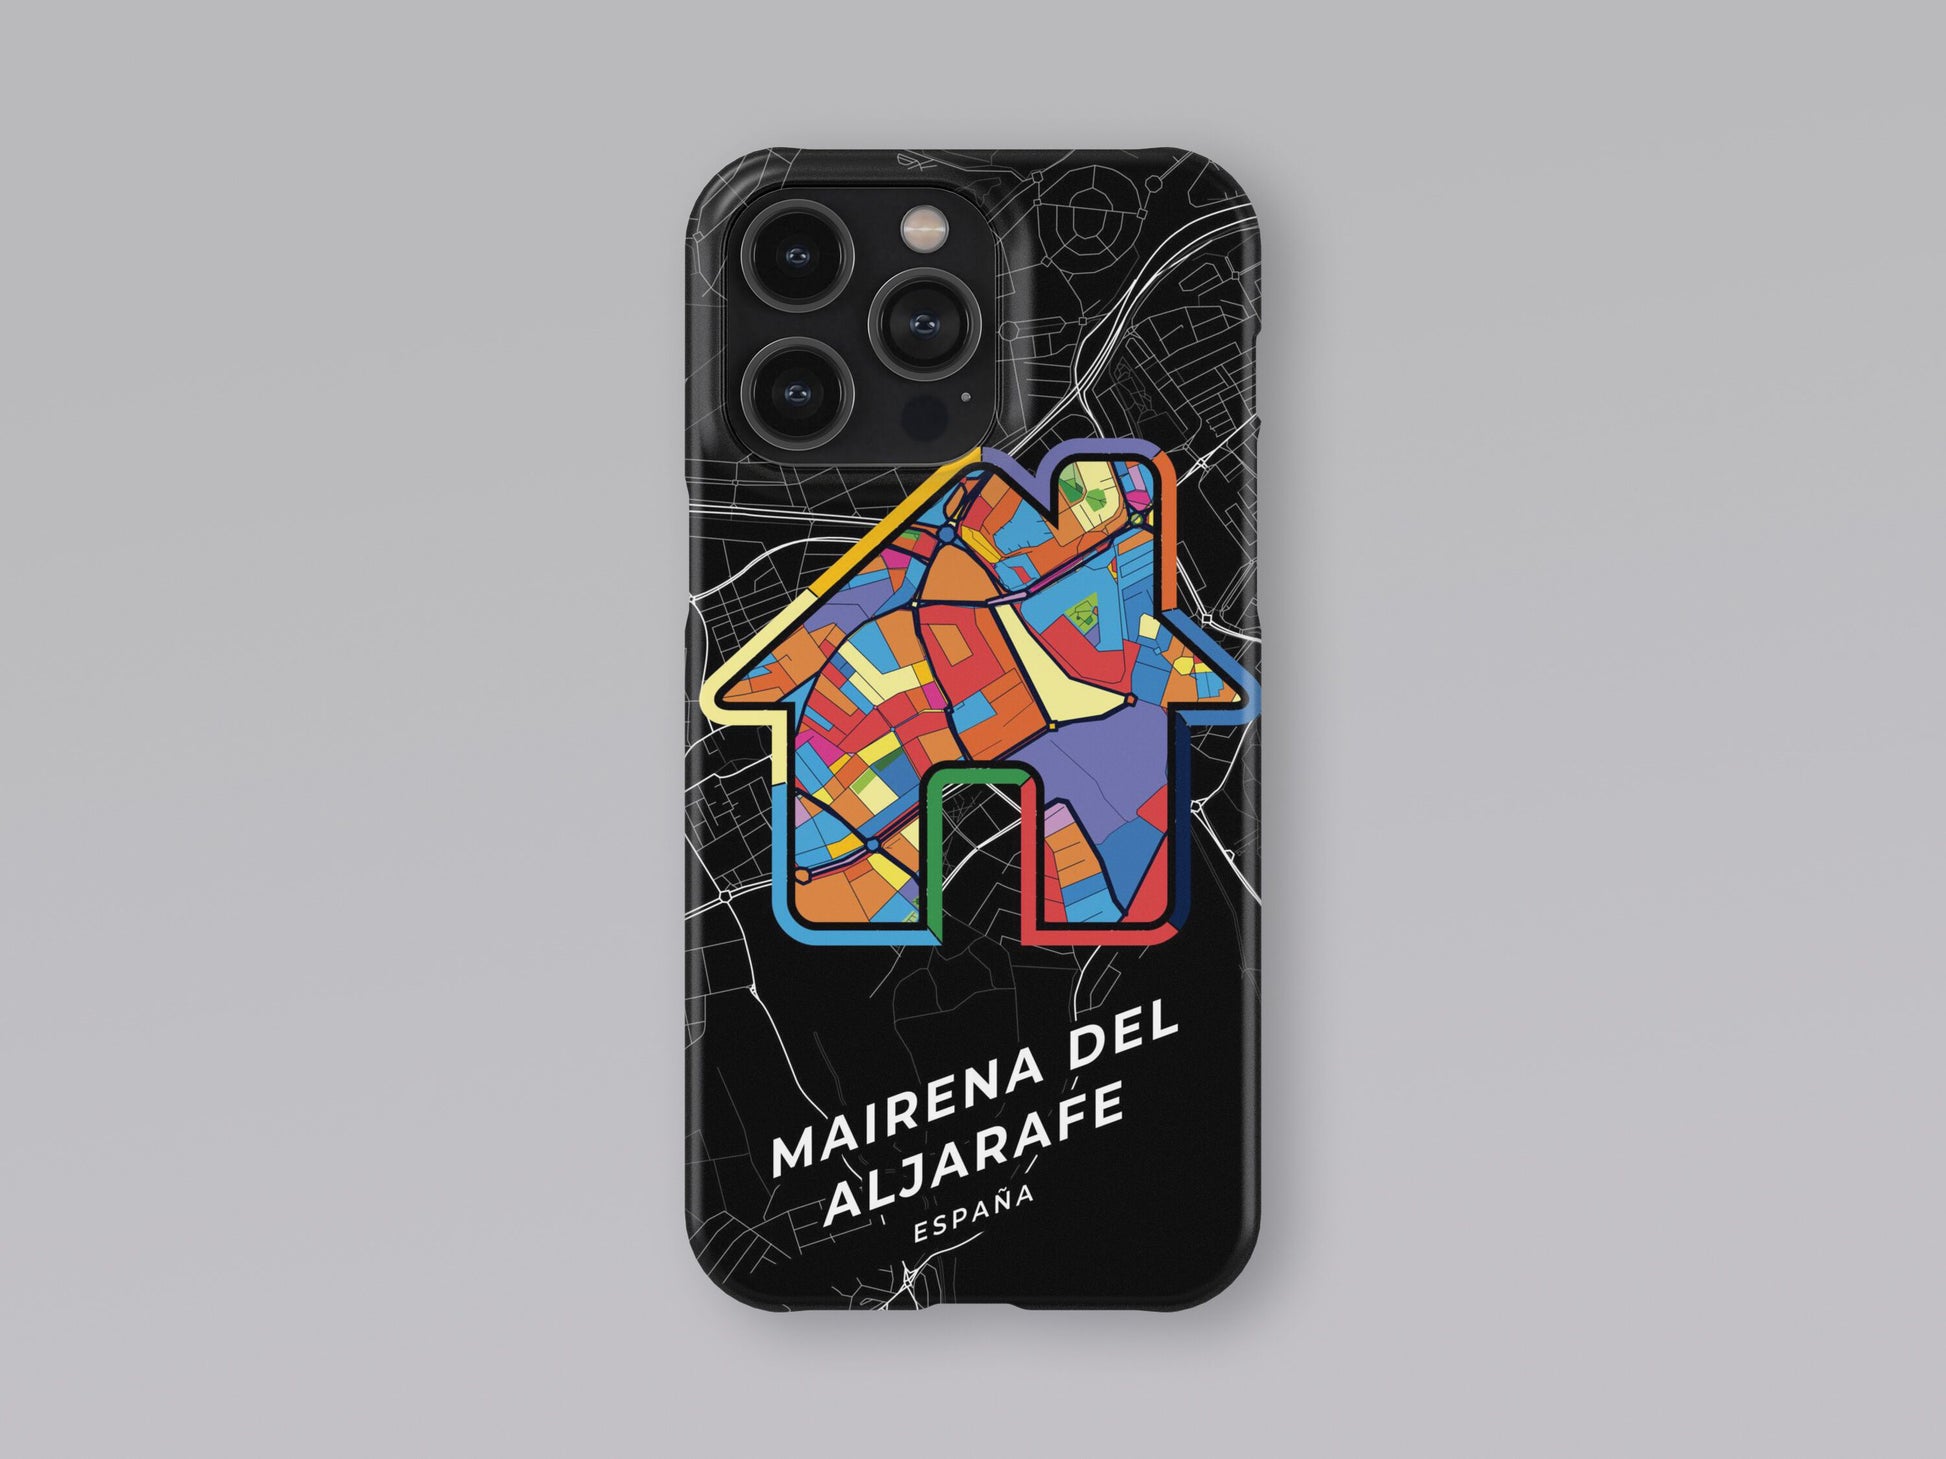 Mairena Del Aljarafe Spain slim phone case with colorful icon. Birthday, wedding or housewarming gift. Couple match cases. 3